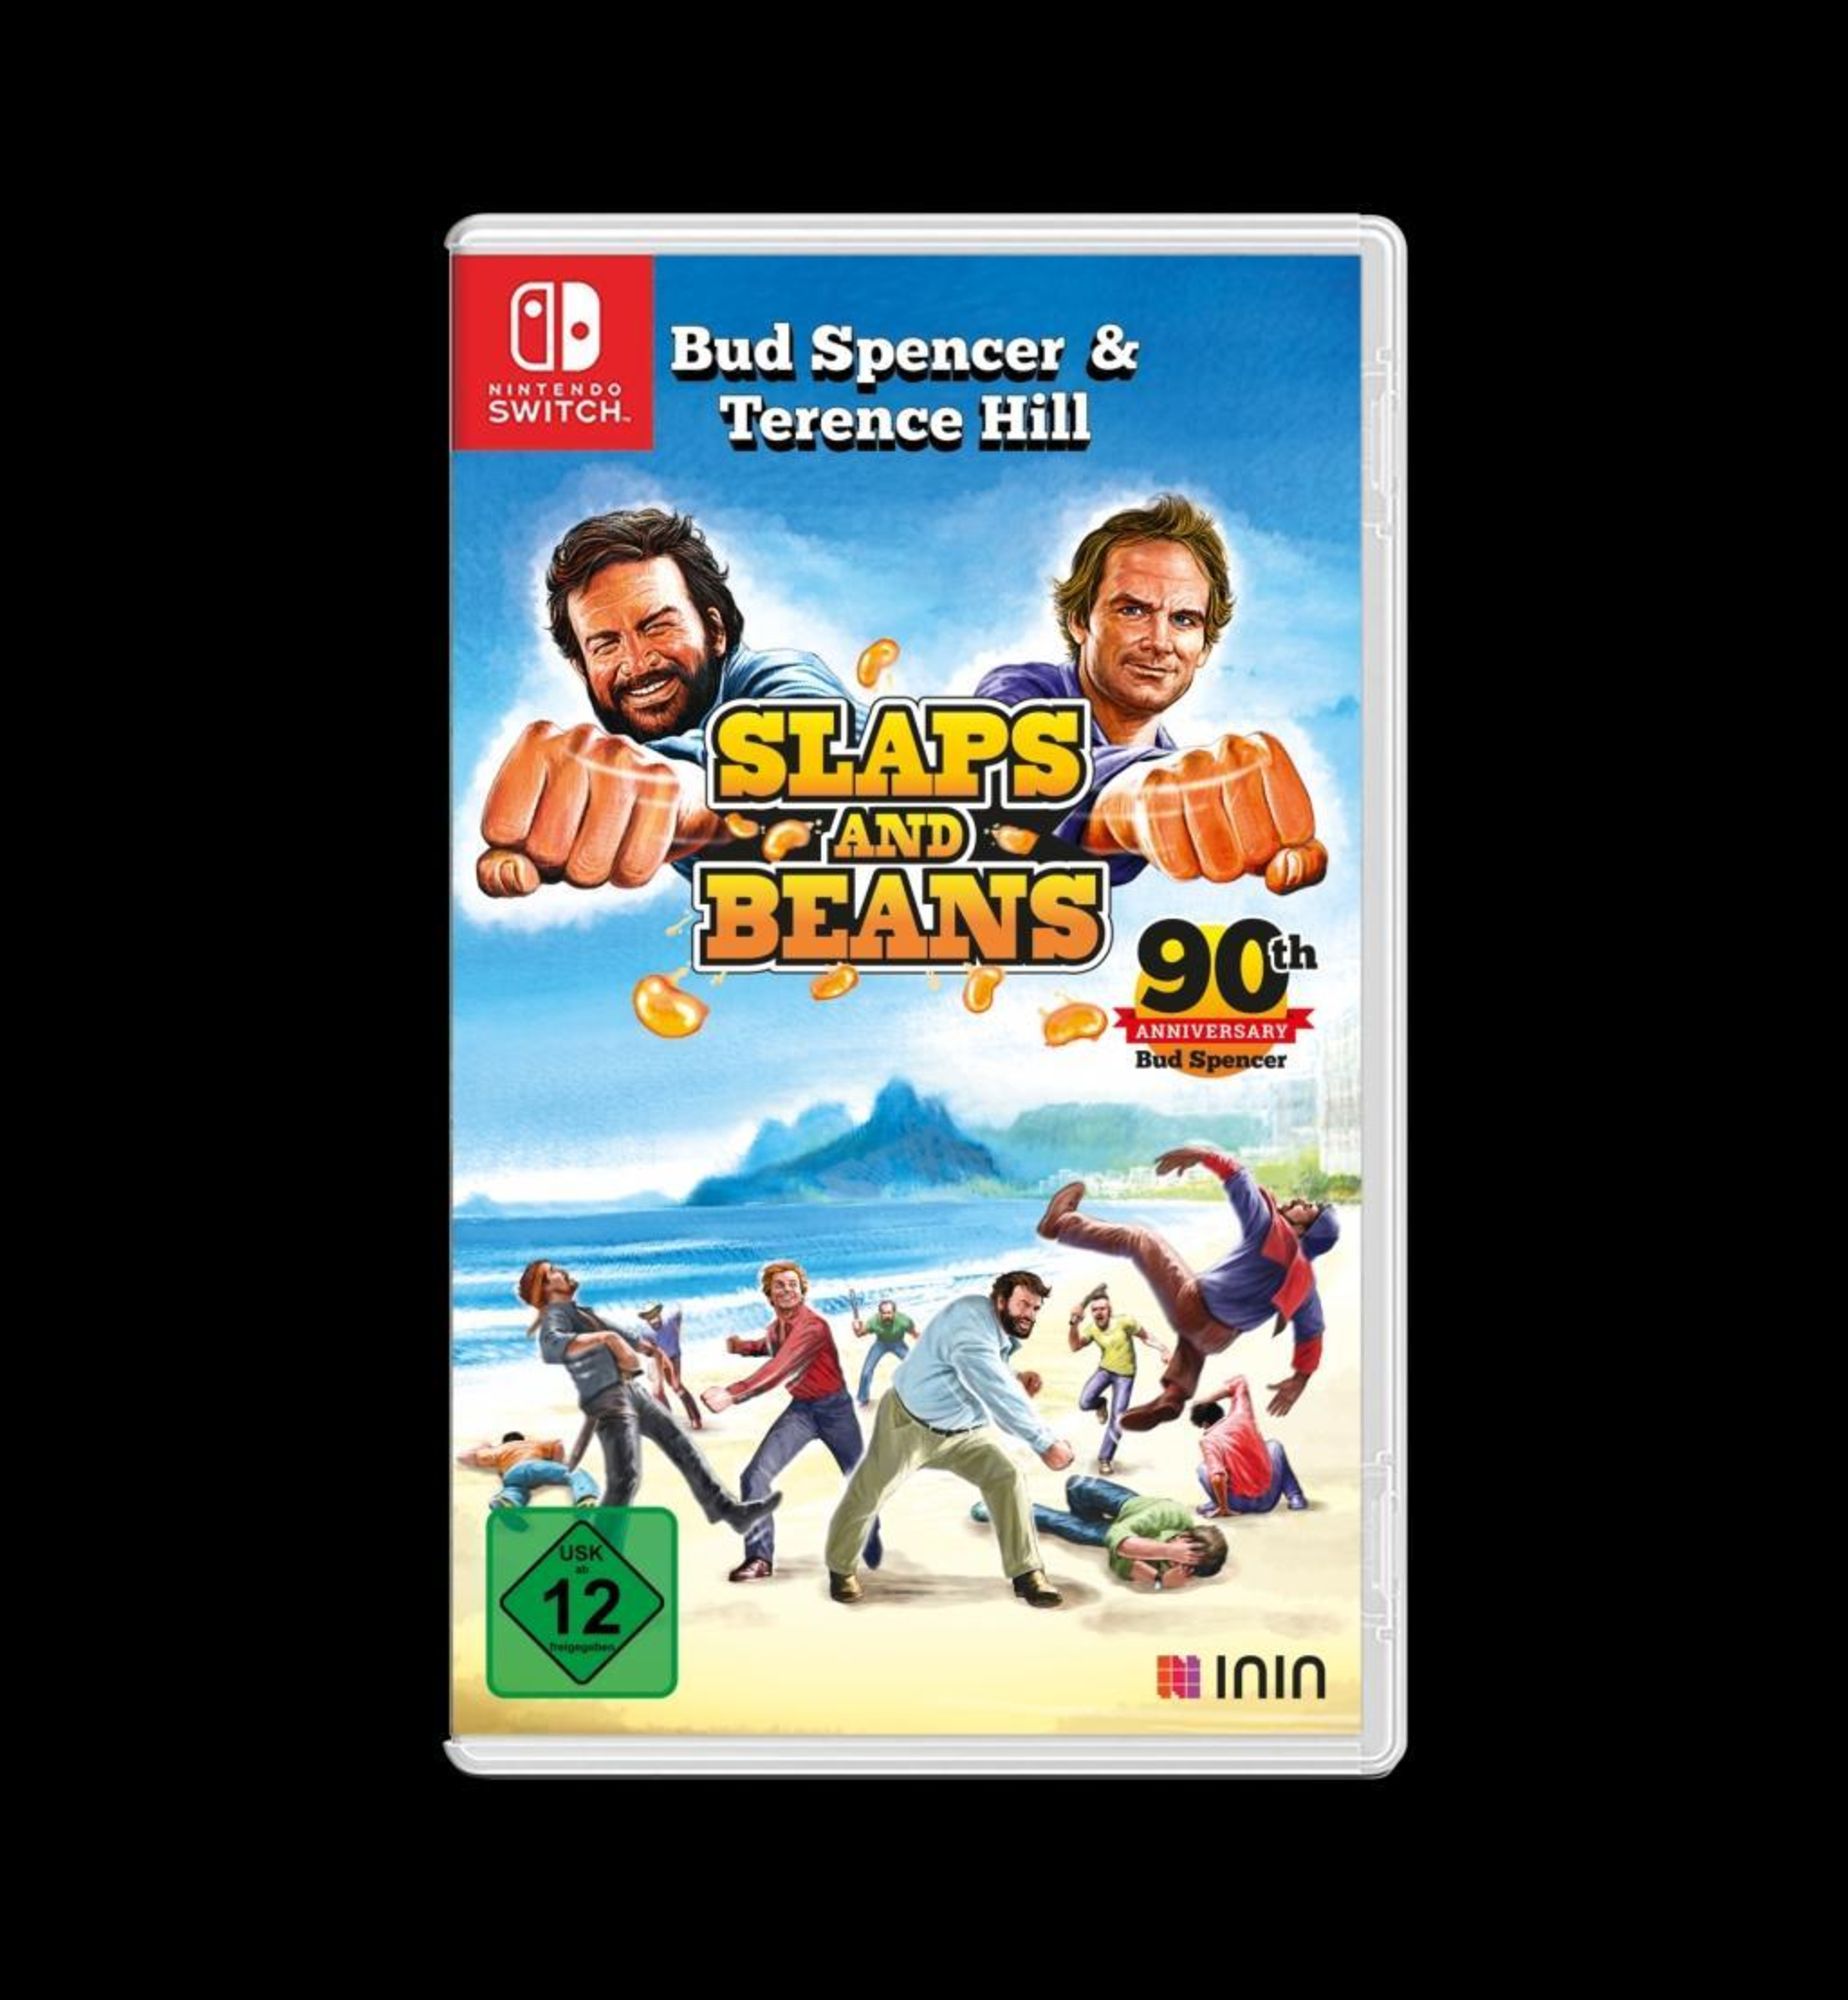 Terence Switch\' and & - kaufen Slaps für Hill Bud Spencer \'Nintendo Beans\'